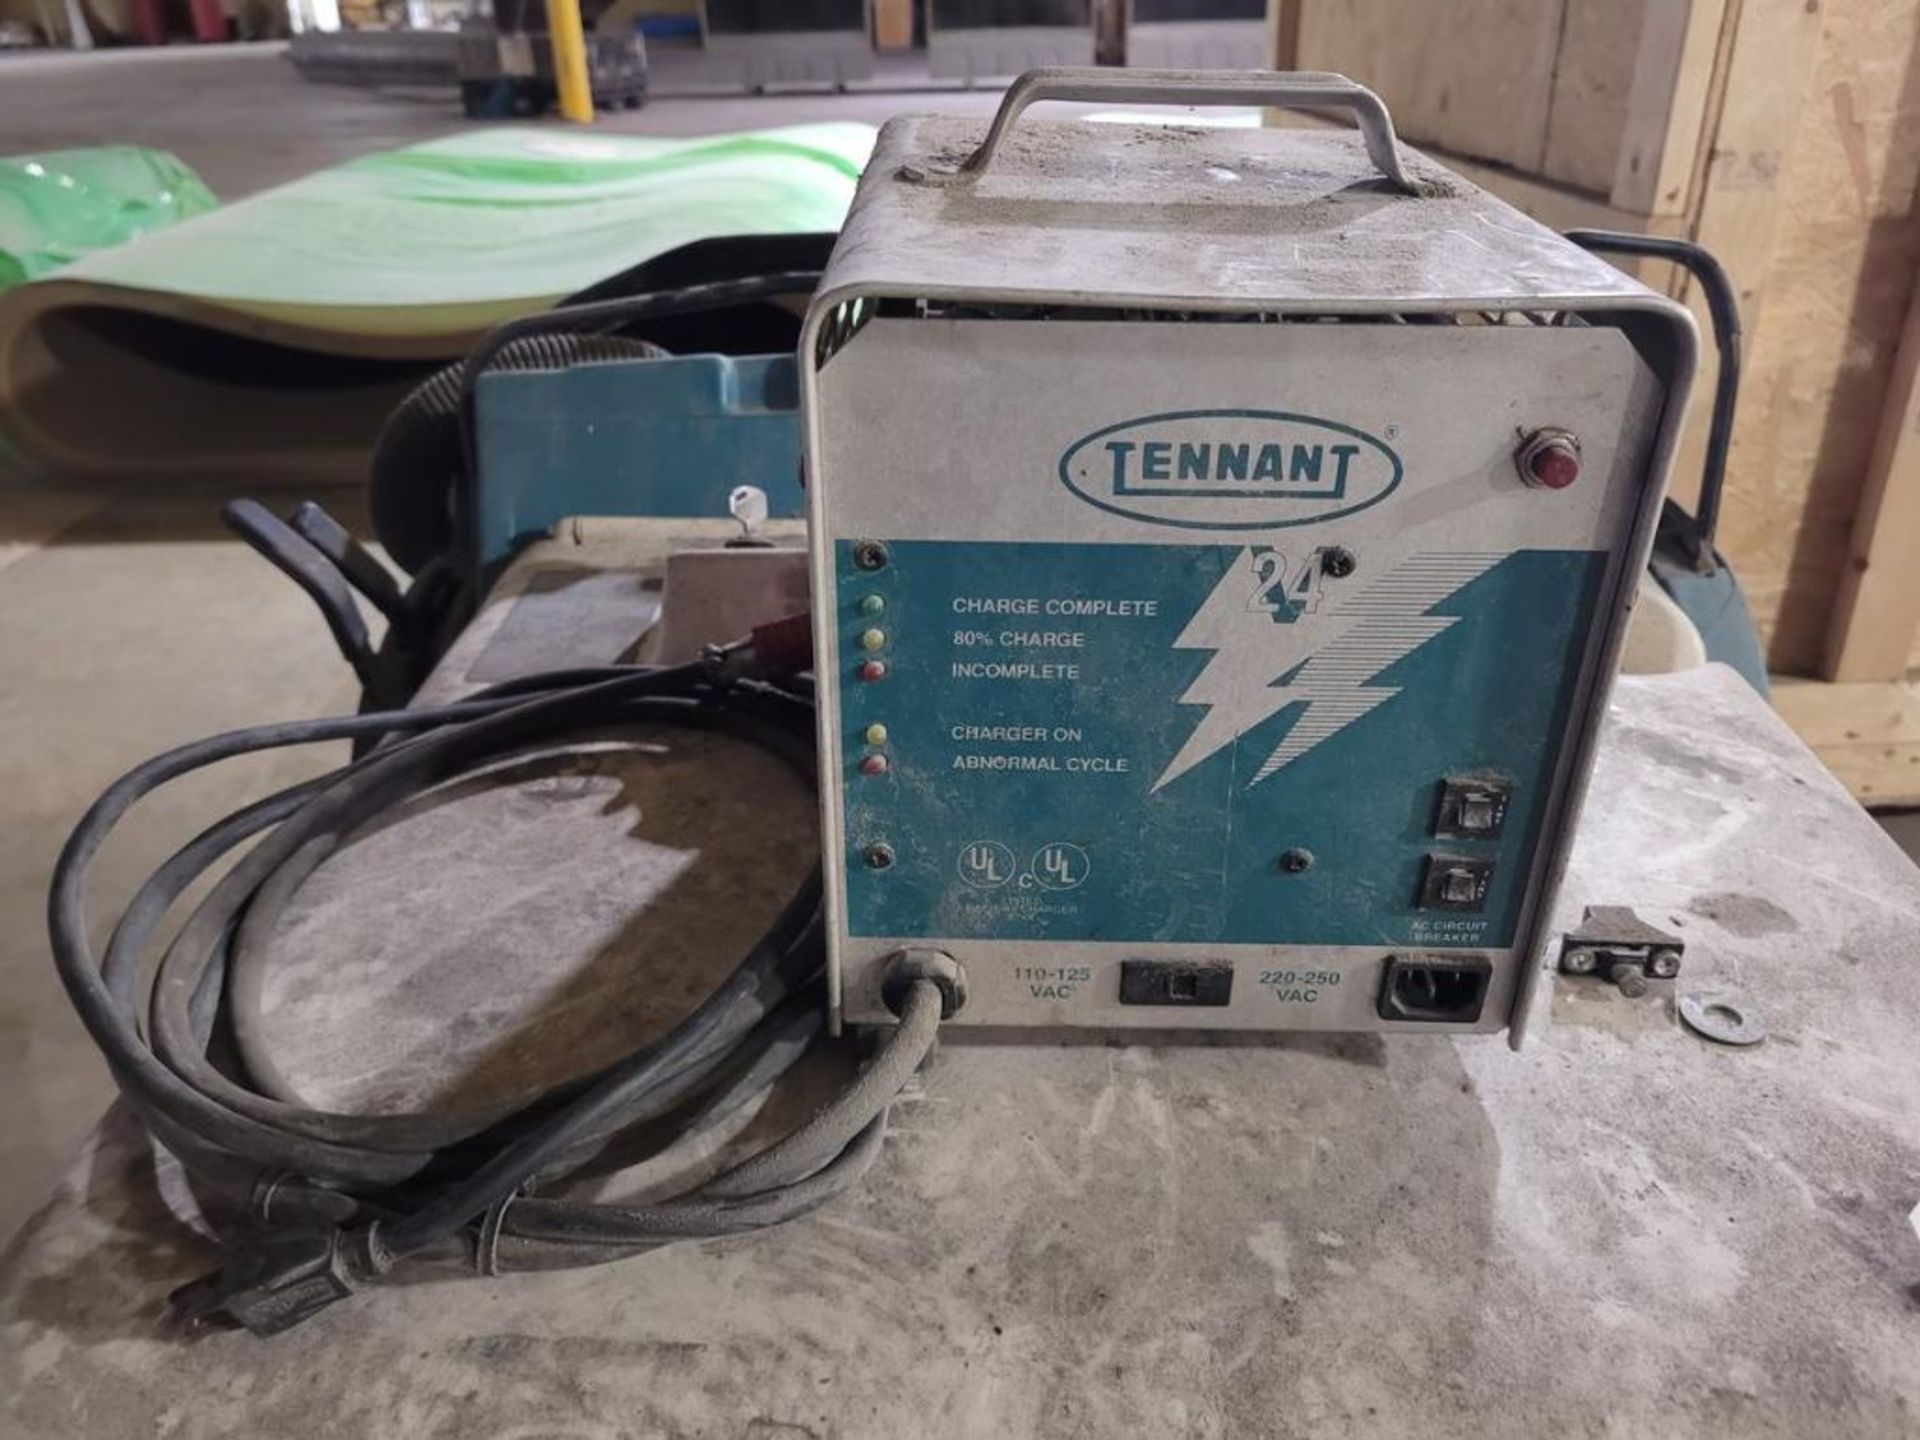 Tennant Model 3640 Electric Walk-Behind Floor Sweeper: 238 Running Hours, with Tennant 24V Battery C - Image 3 of 3